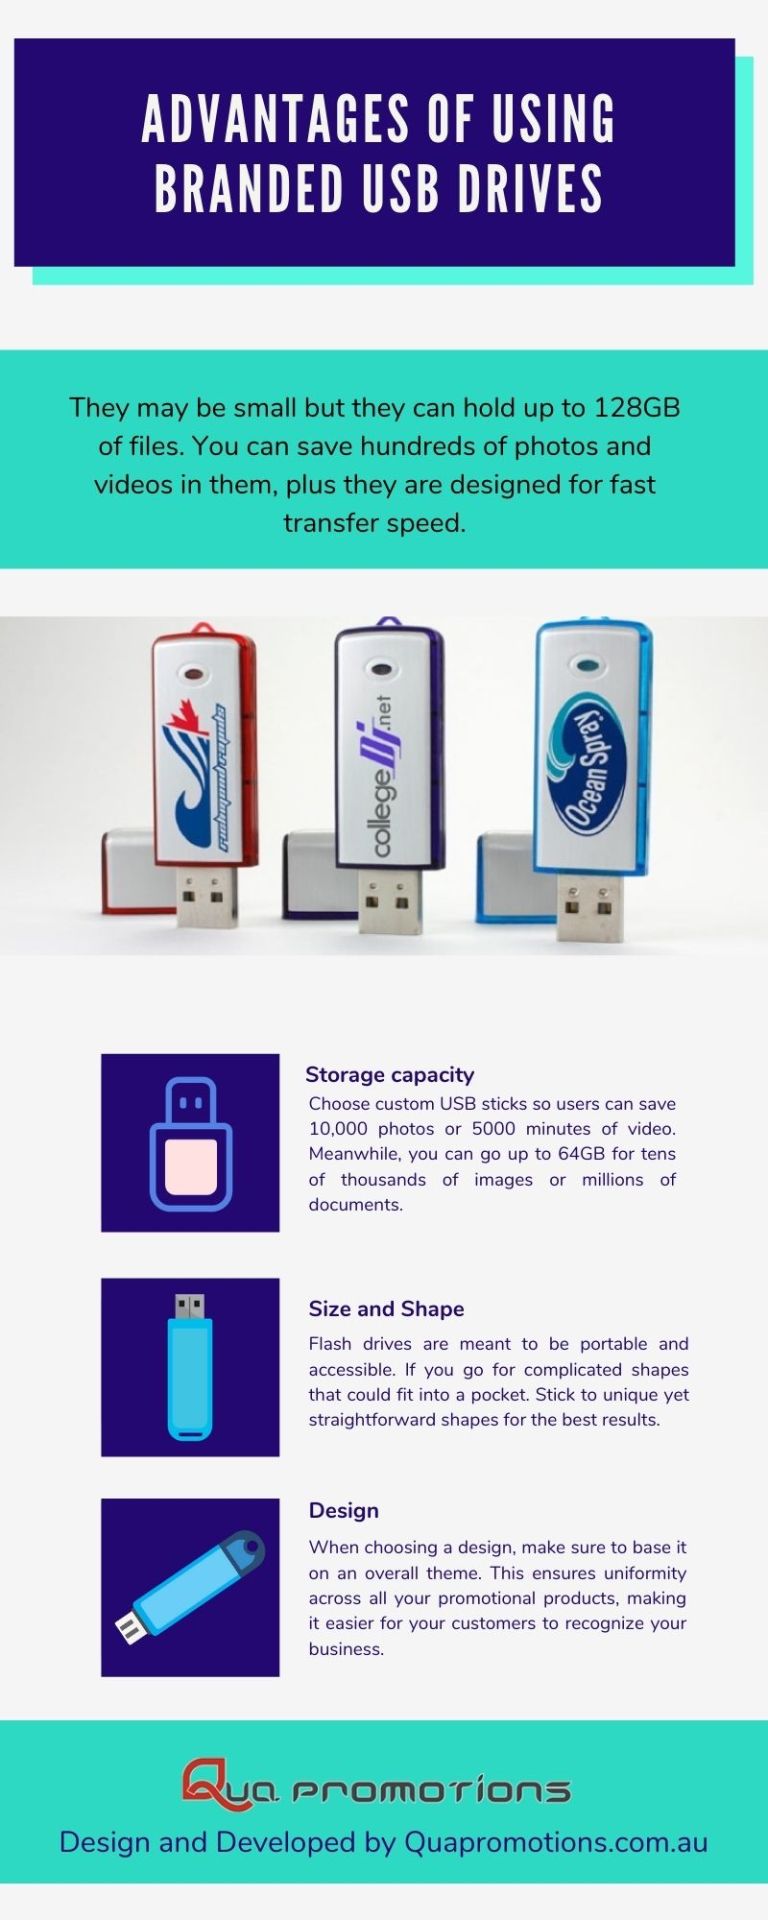 Advantages of using branded USB drives